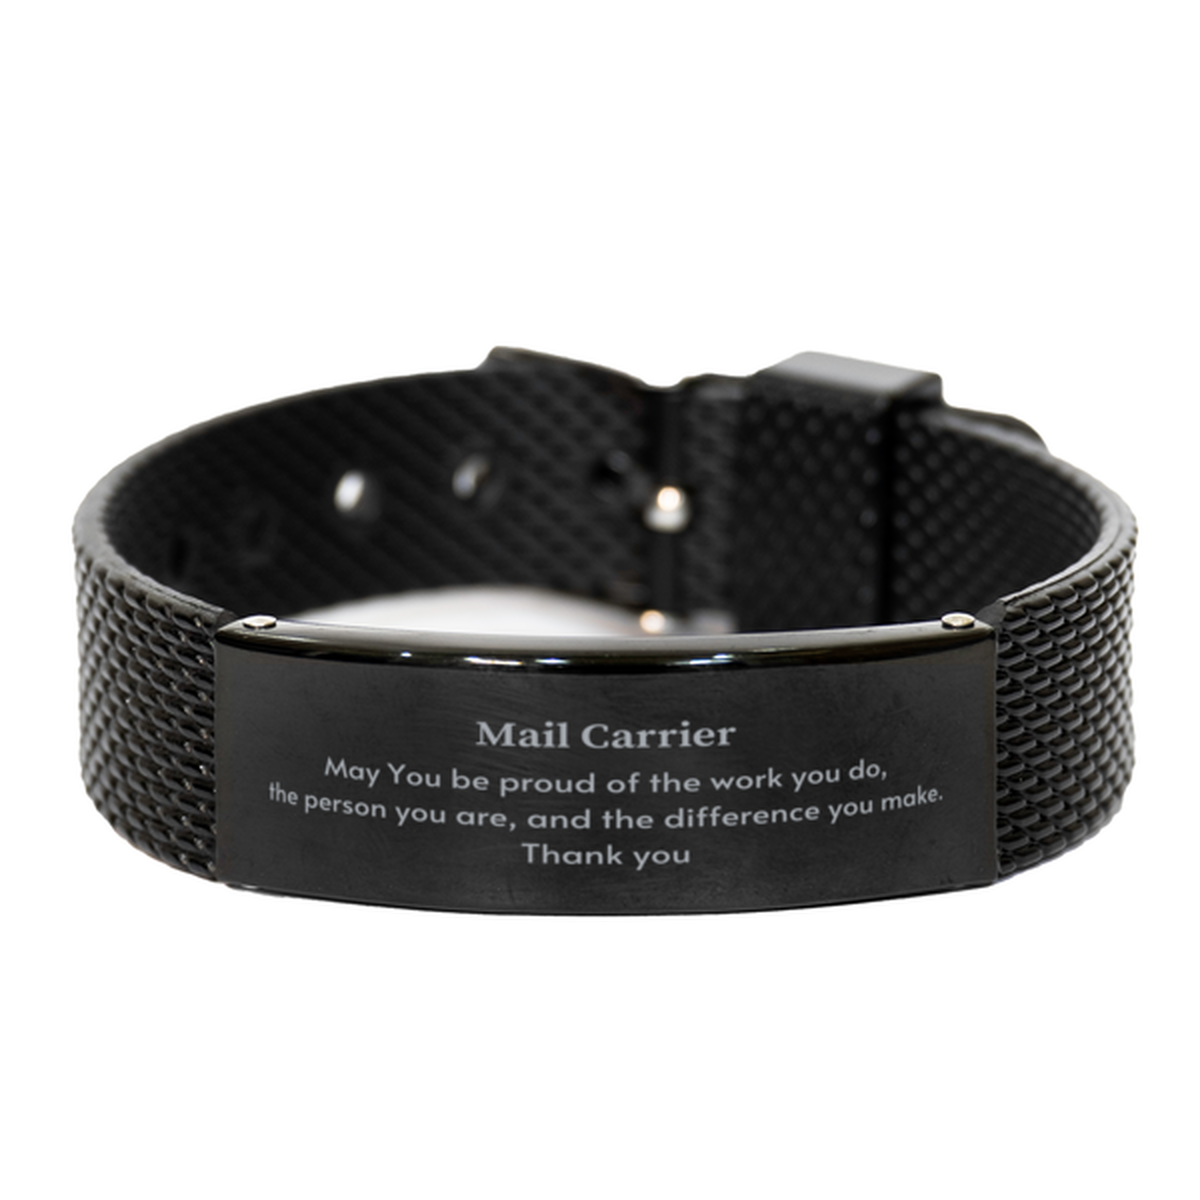 Heartwarming Black Shark Mesh Bracelet Retirement Coworkers Gifts for Mail Carrier, Mail Carrier May You be proud of the work you do, the person you are Gifts for Boss Men Women Friends